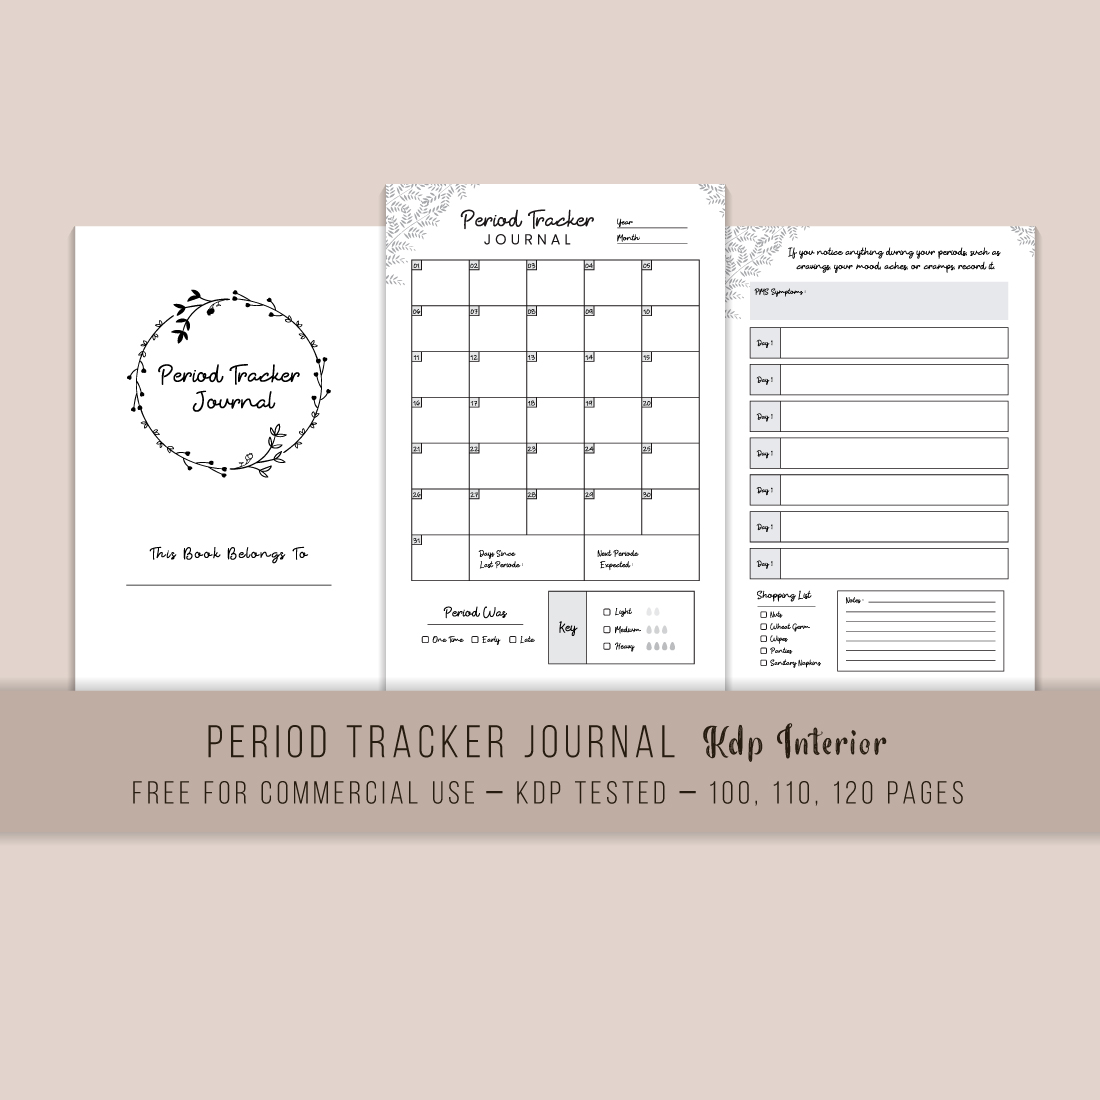 Period Tracker Journal KDP Interior main cover